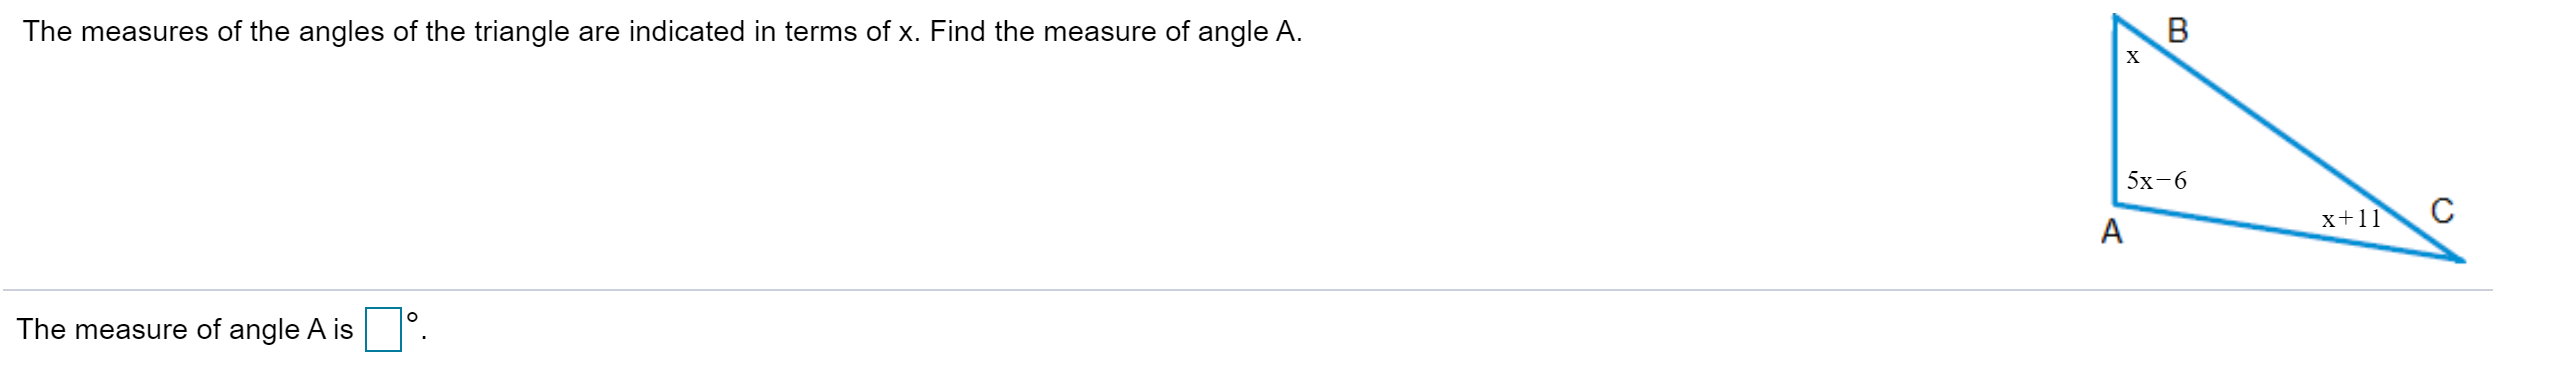 The measures of the angles of the triangle are indicated in terms of x. Find the measure of angle A.
х
5х-6
x+11
The measure of angle A is
